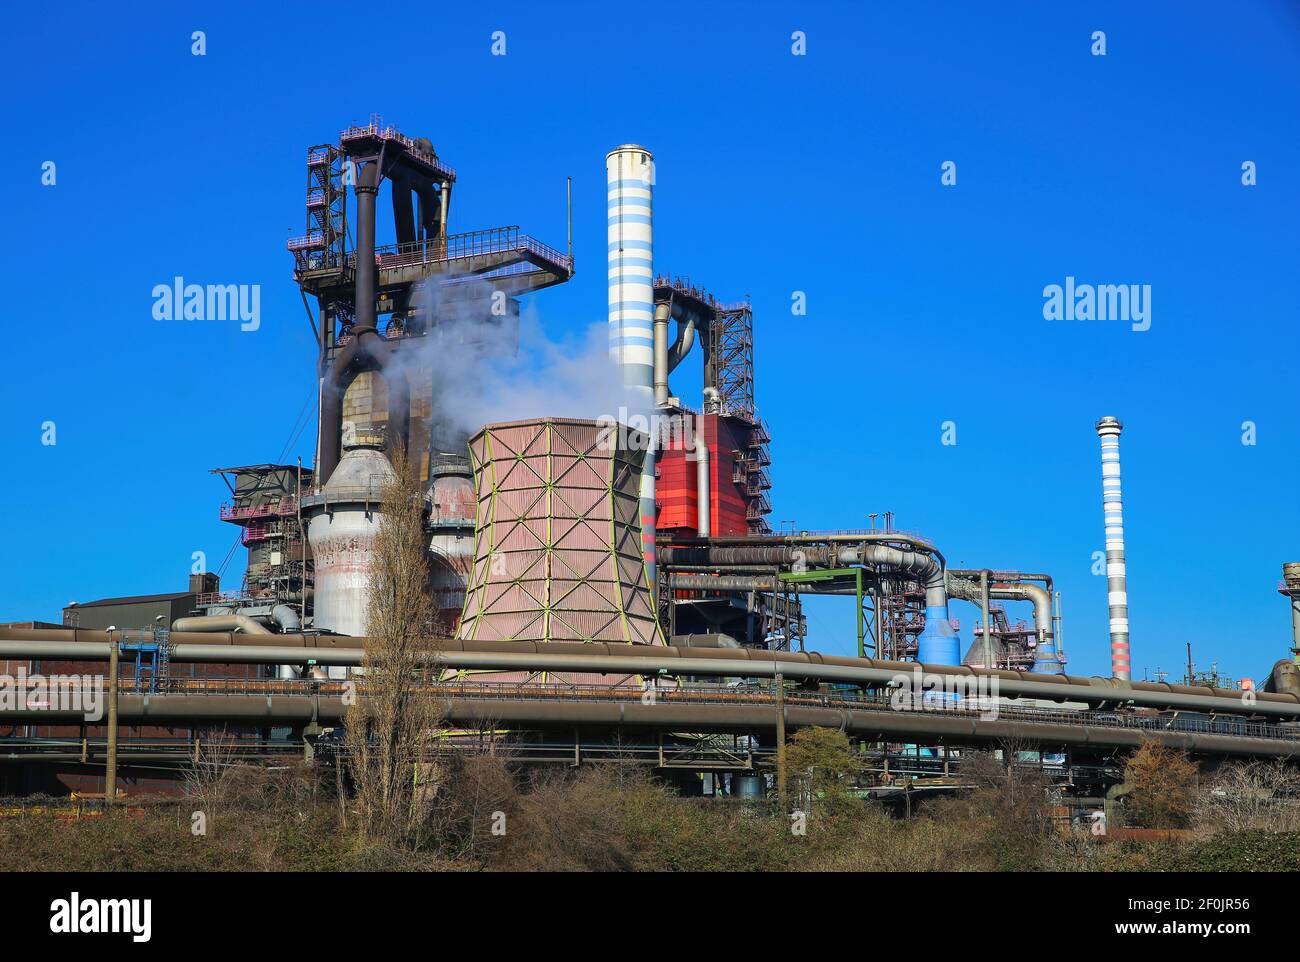 Duisburg (ruhrgebiet), Germany - March 1. 2021: View on industrial complex with smoking chimneys and tower against blue sky - Thyssen Krupp steel comp Stock Photo